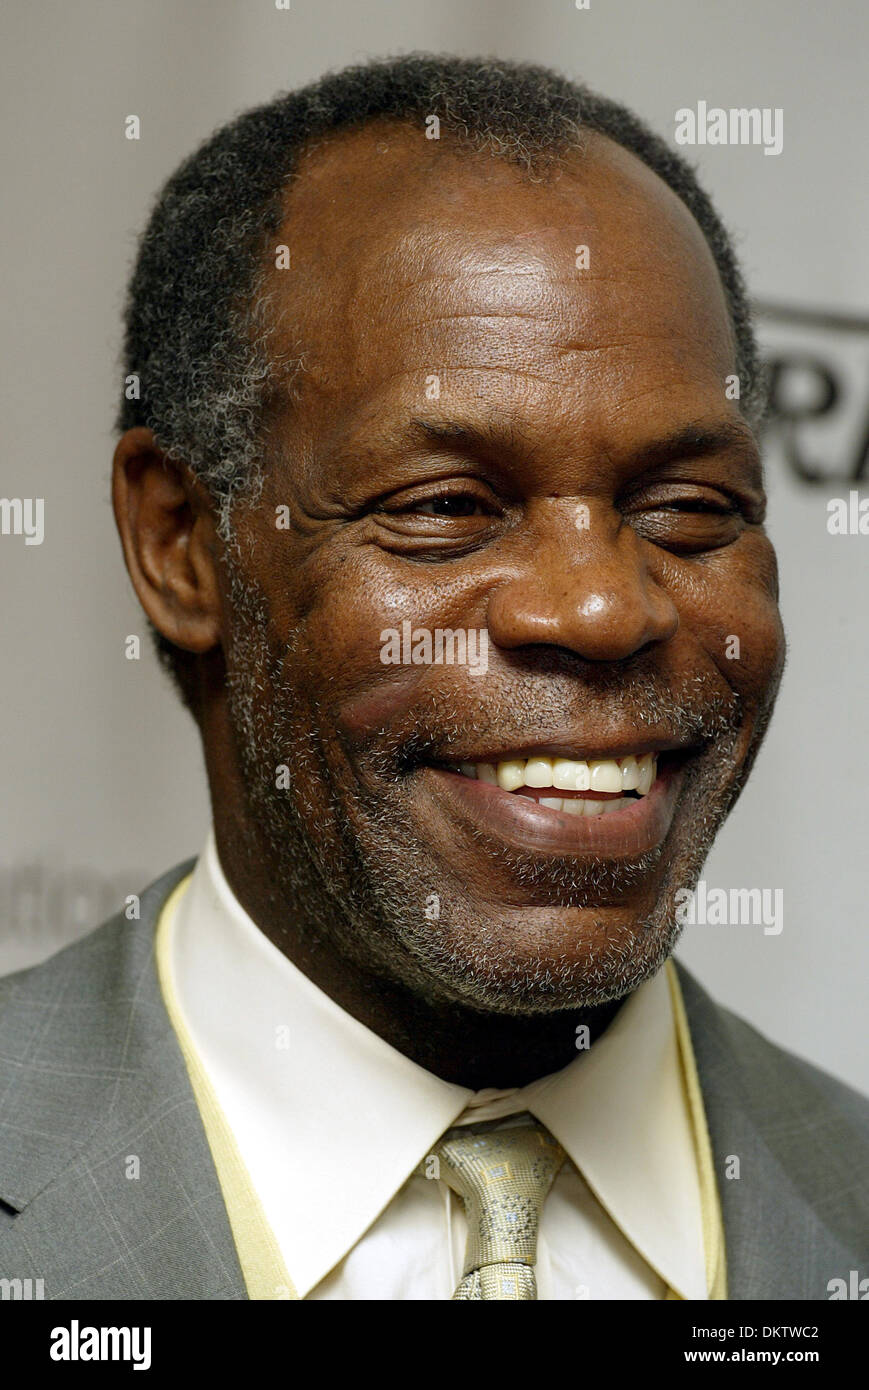 DANNY GLOVER.ACTOR. BEVERLY HILLS, USA.REGENT BEVERLY WILSHIRE HOTEL.28/10/2002.LAC10505. Stock Photo